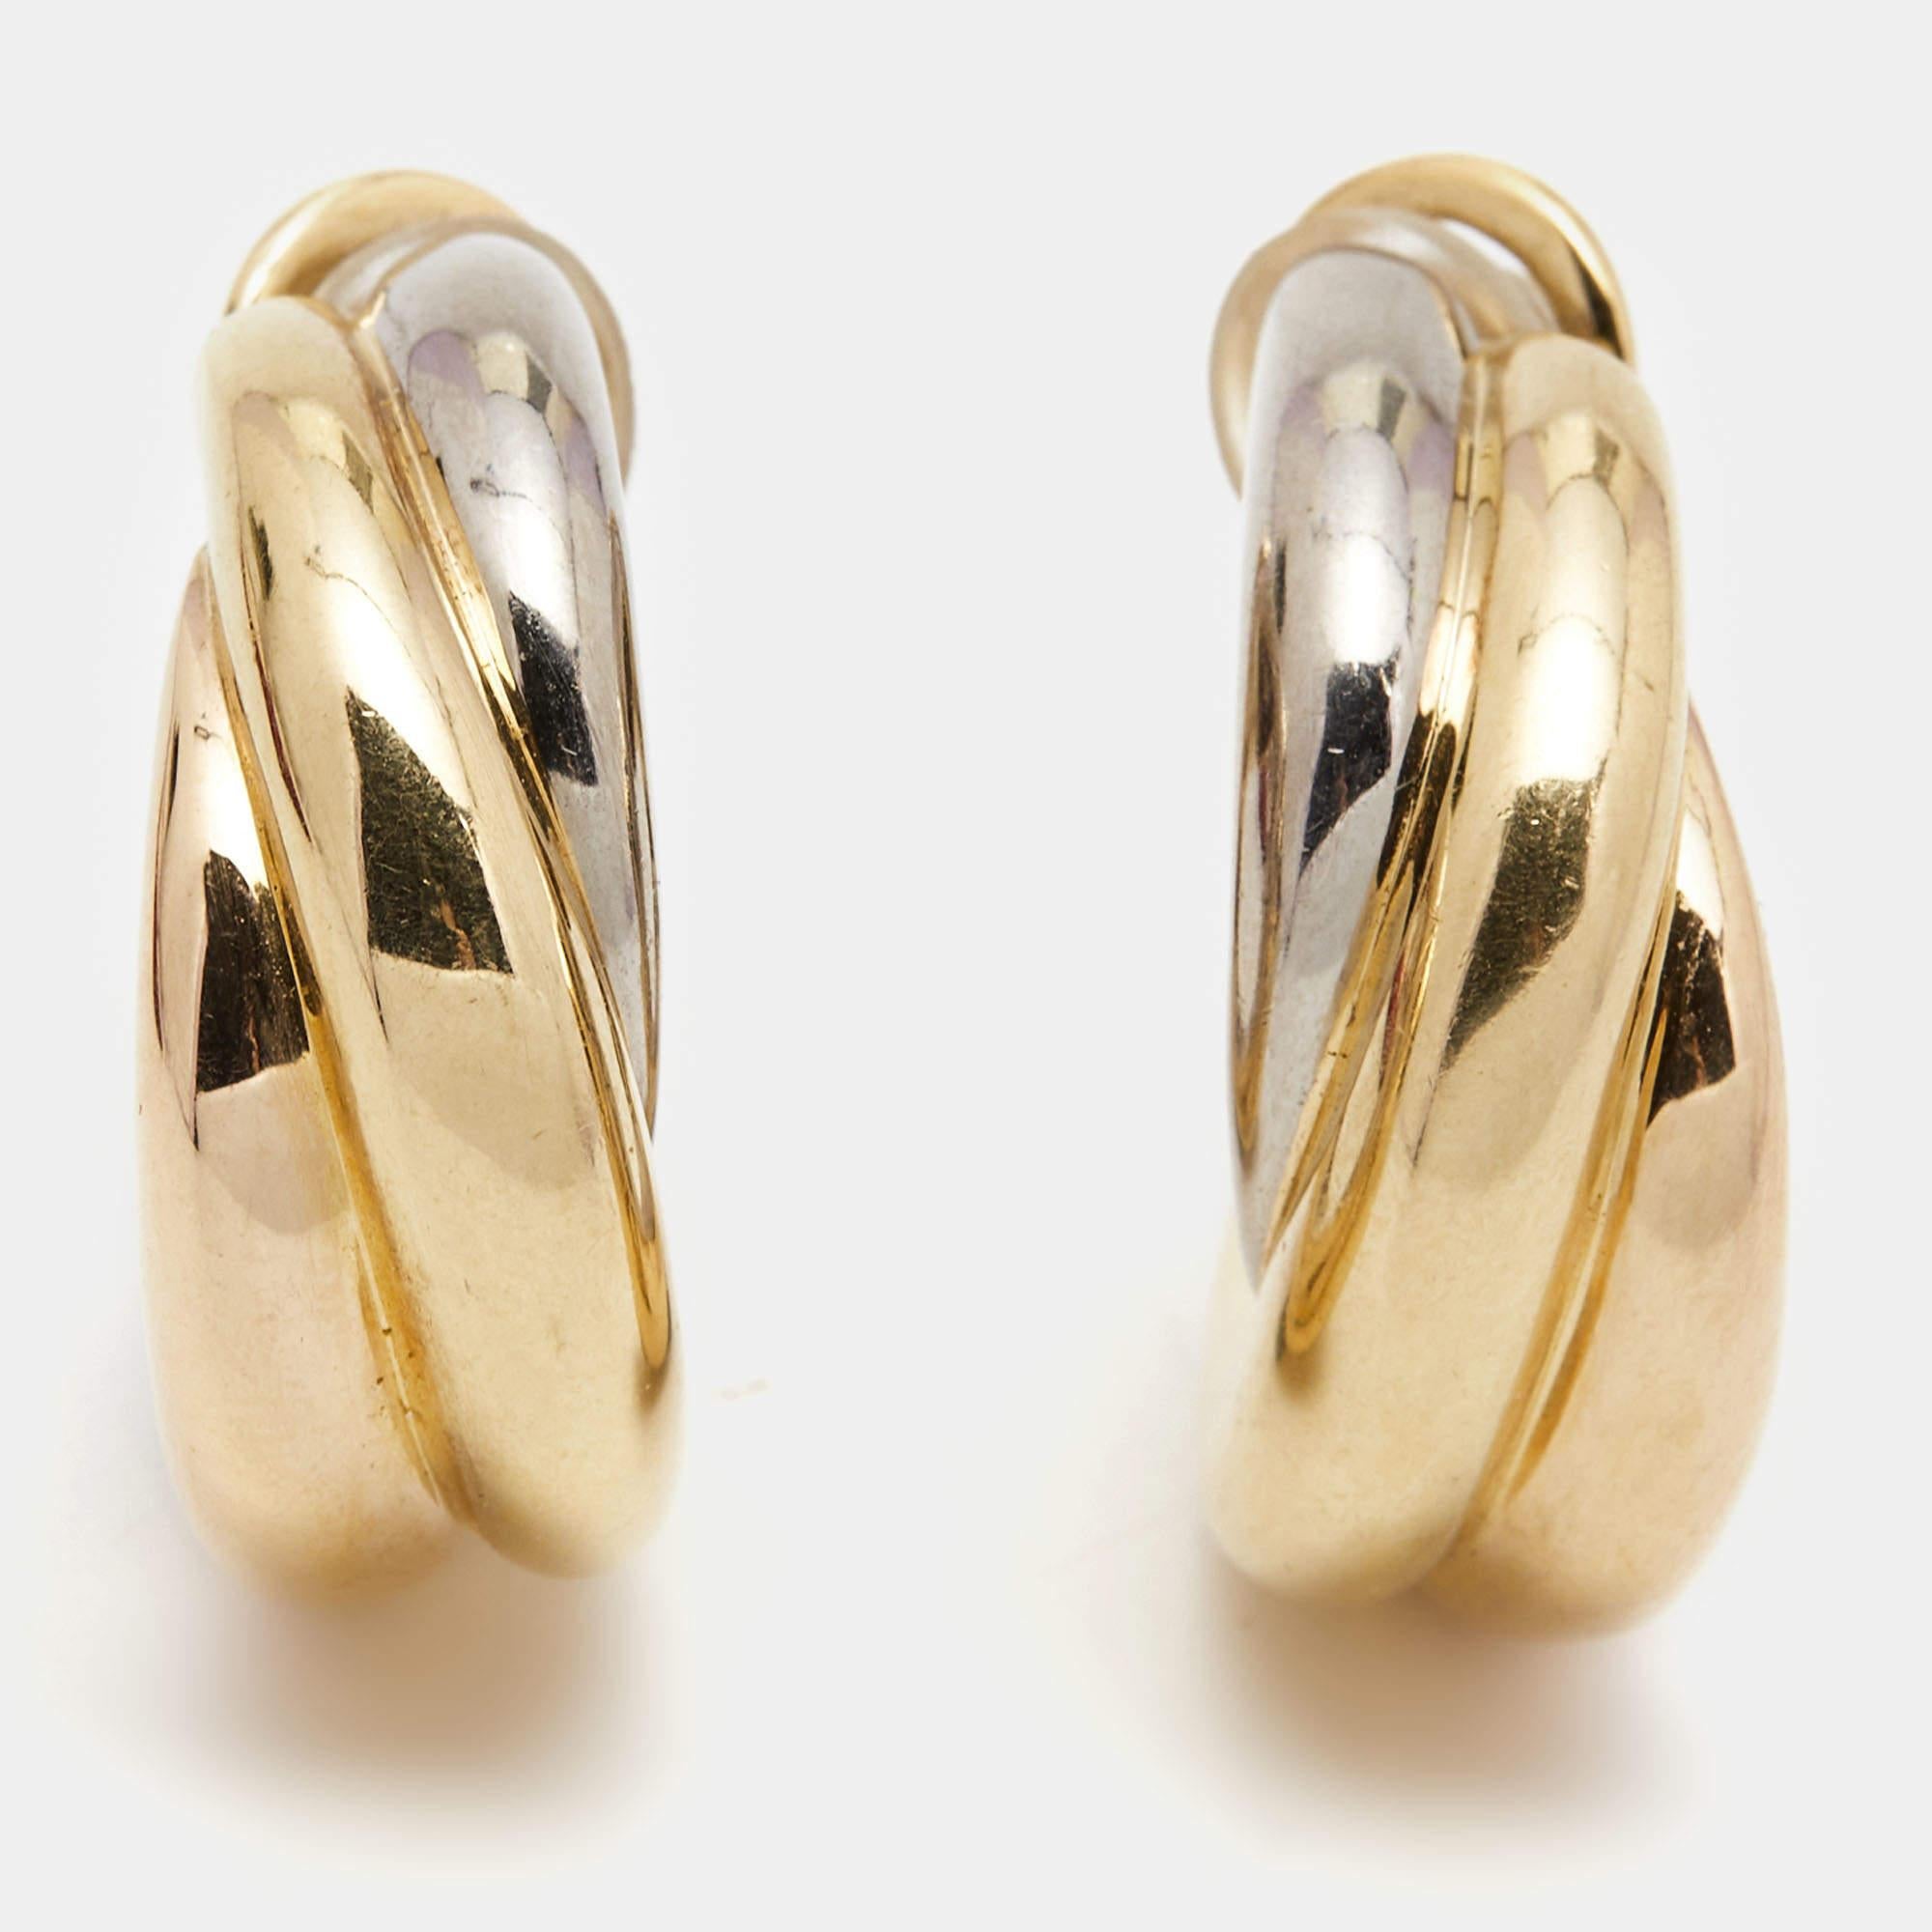 Aesthetic Movement Cartier Trinity 18k Three Tone Gold Earrings For Sale